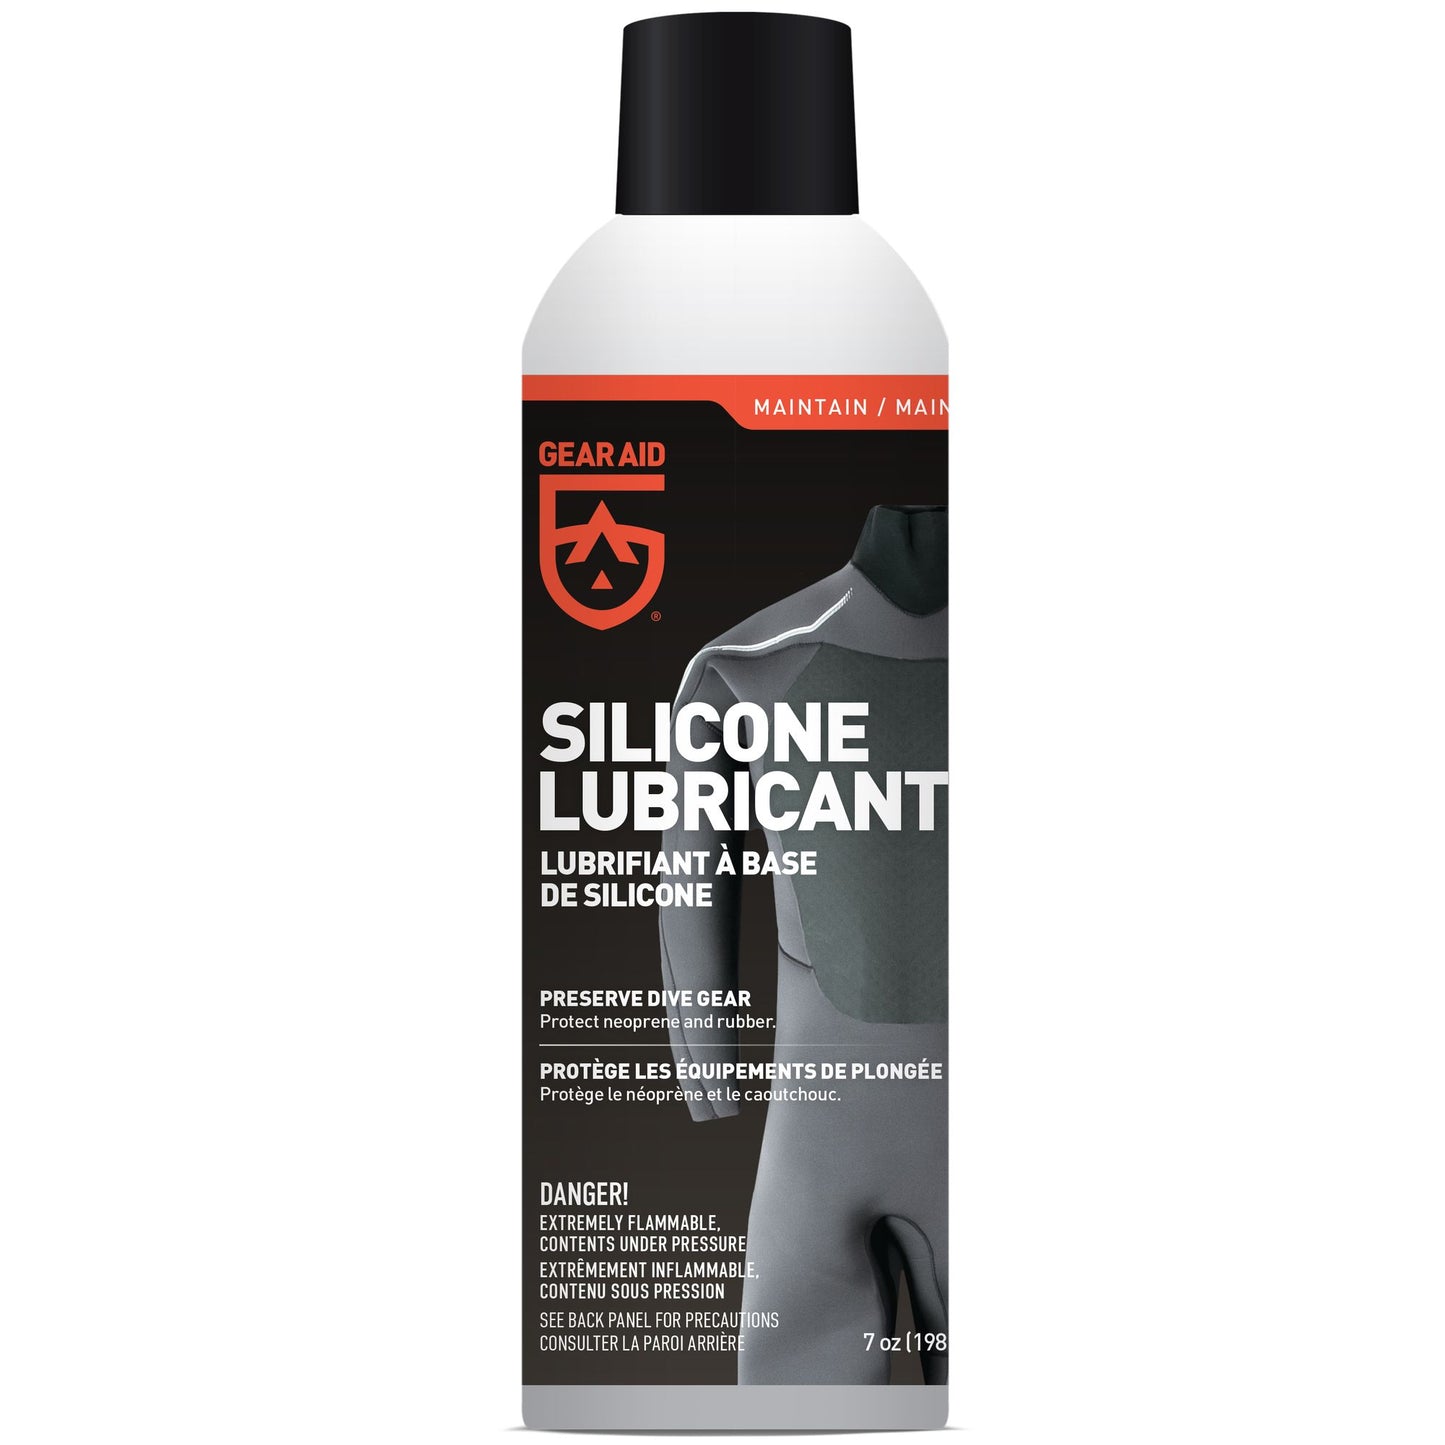 Can of Gear Aid Silicone Lubricant spray with warnings and usage instructions.